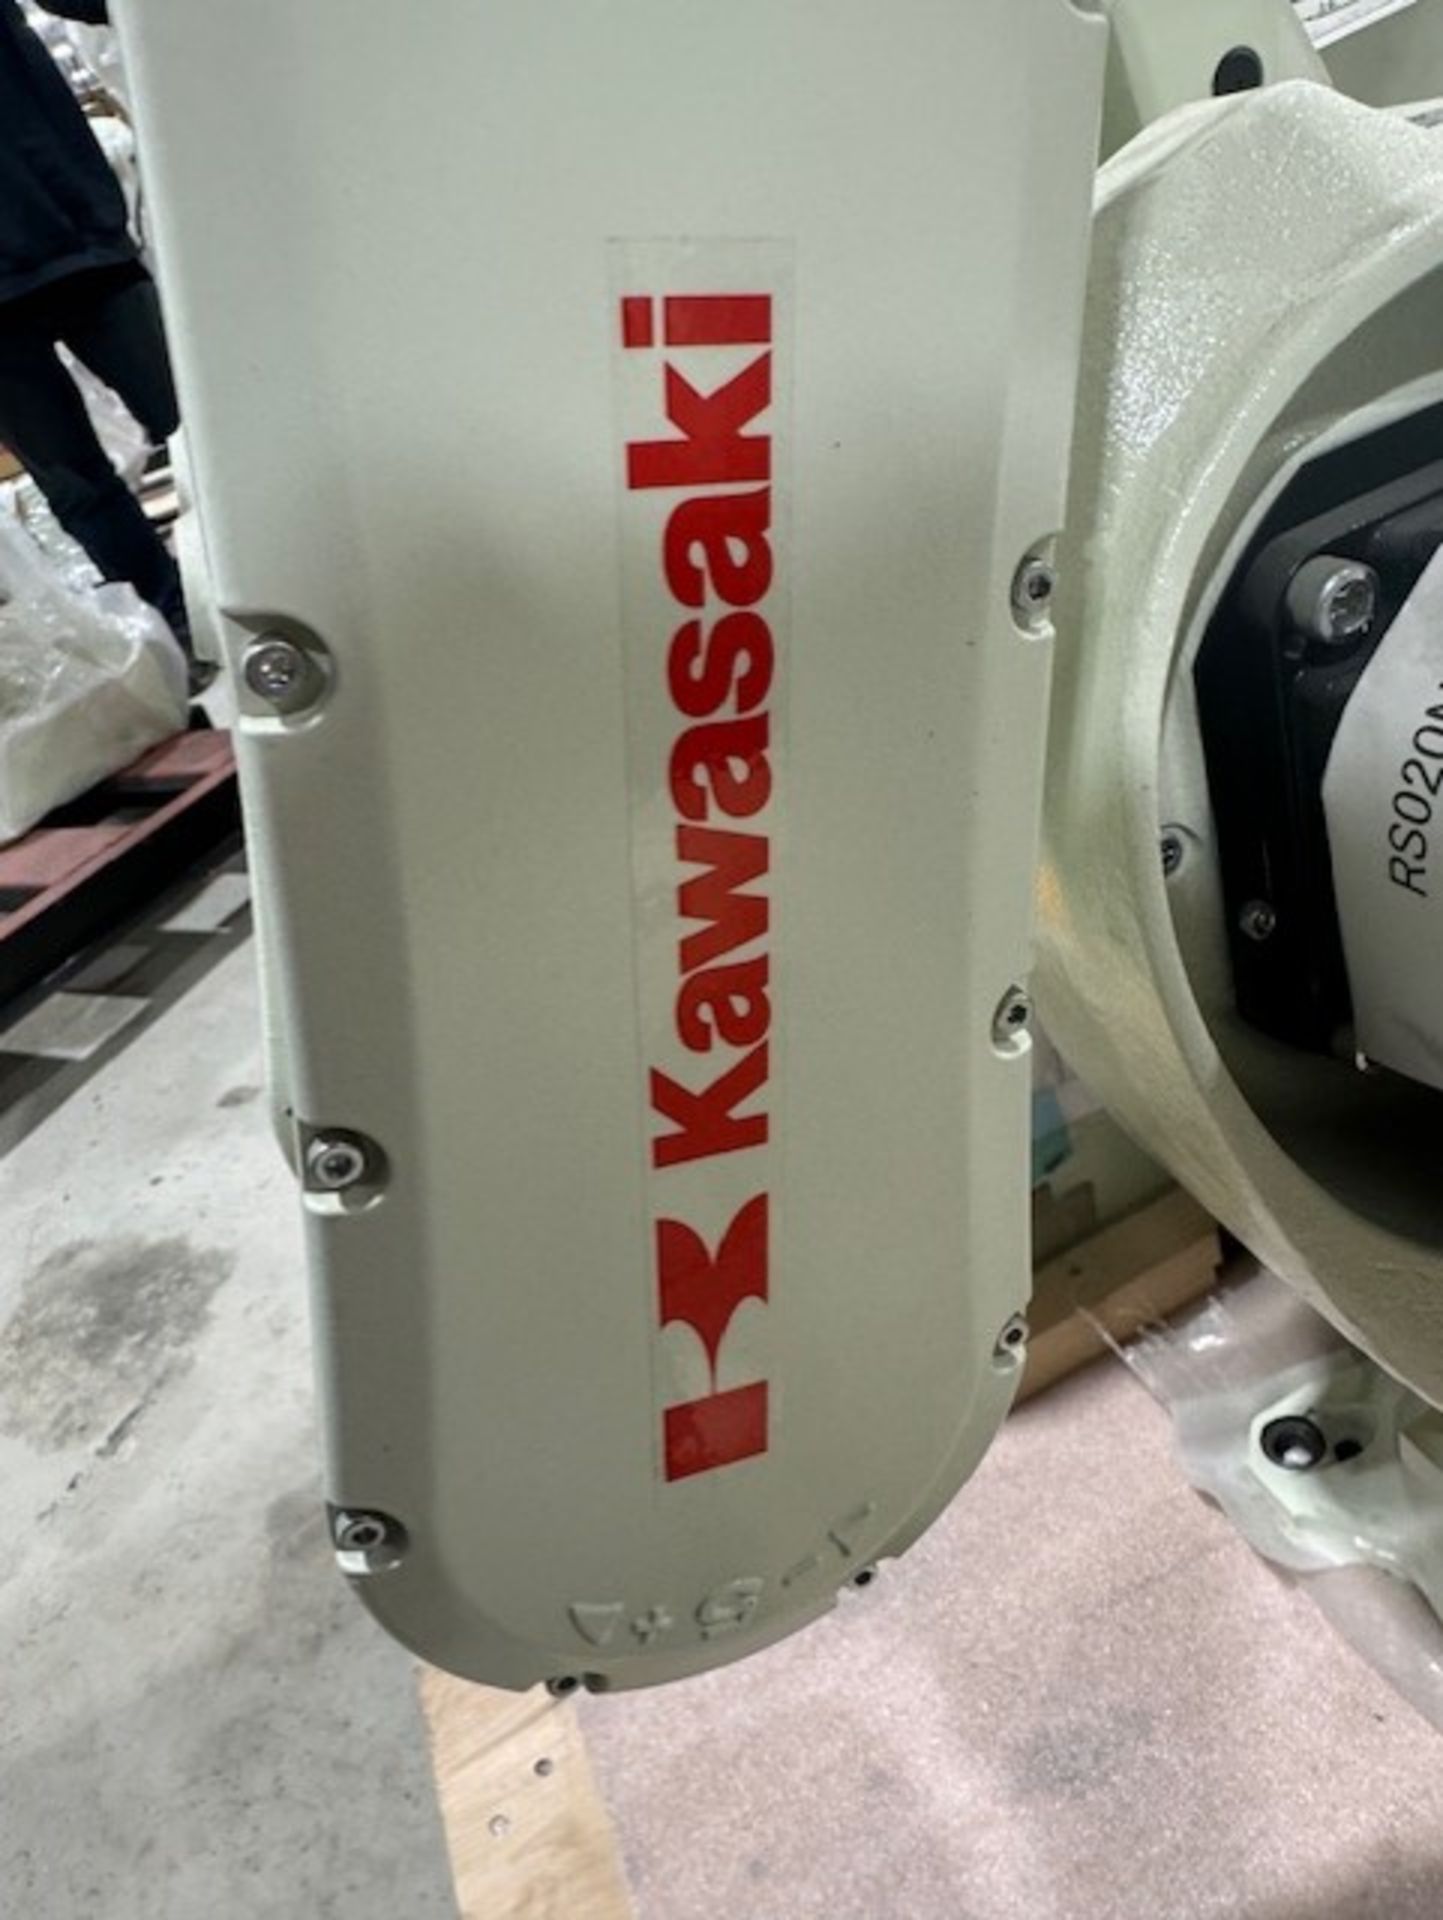 NEW KAWASAKI ROBOT MODEL RS020N, SN 4589, 20KG X 1725MM REACH WITH EO1 CONTROLS, CABLES & TEACH - Image 5 of 7